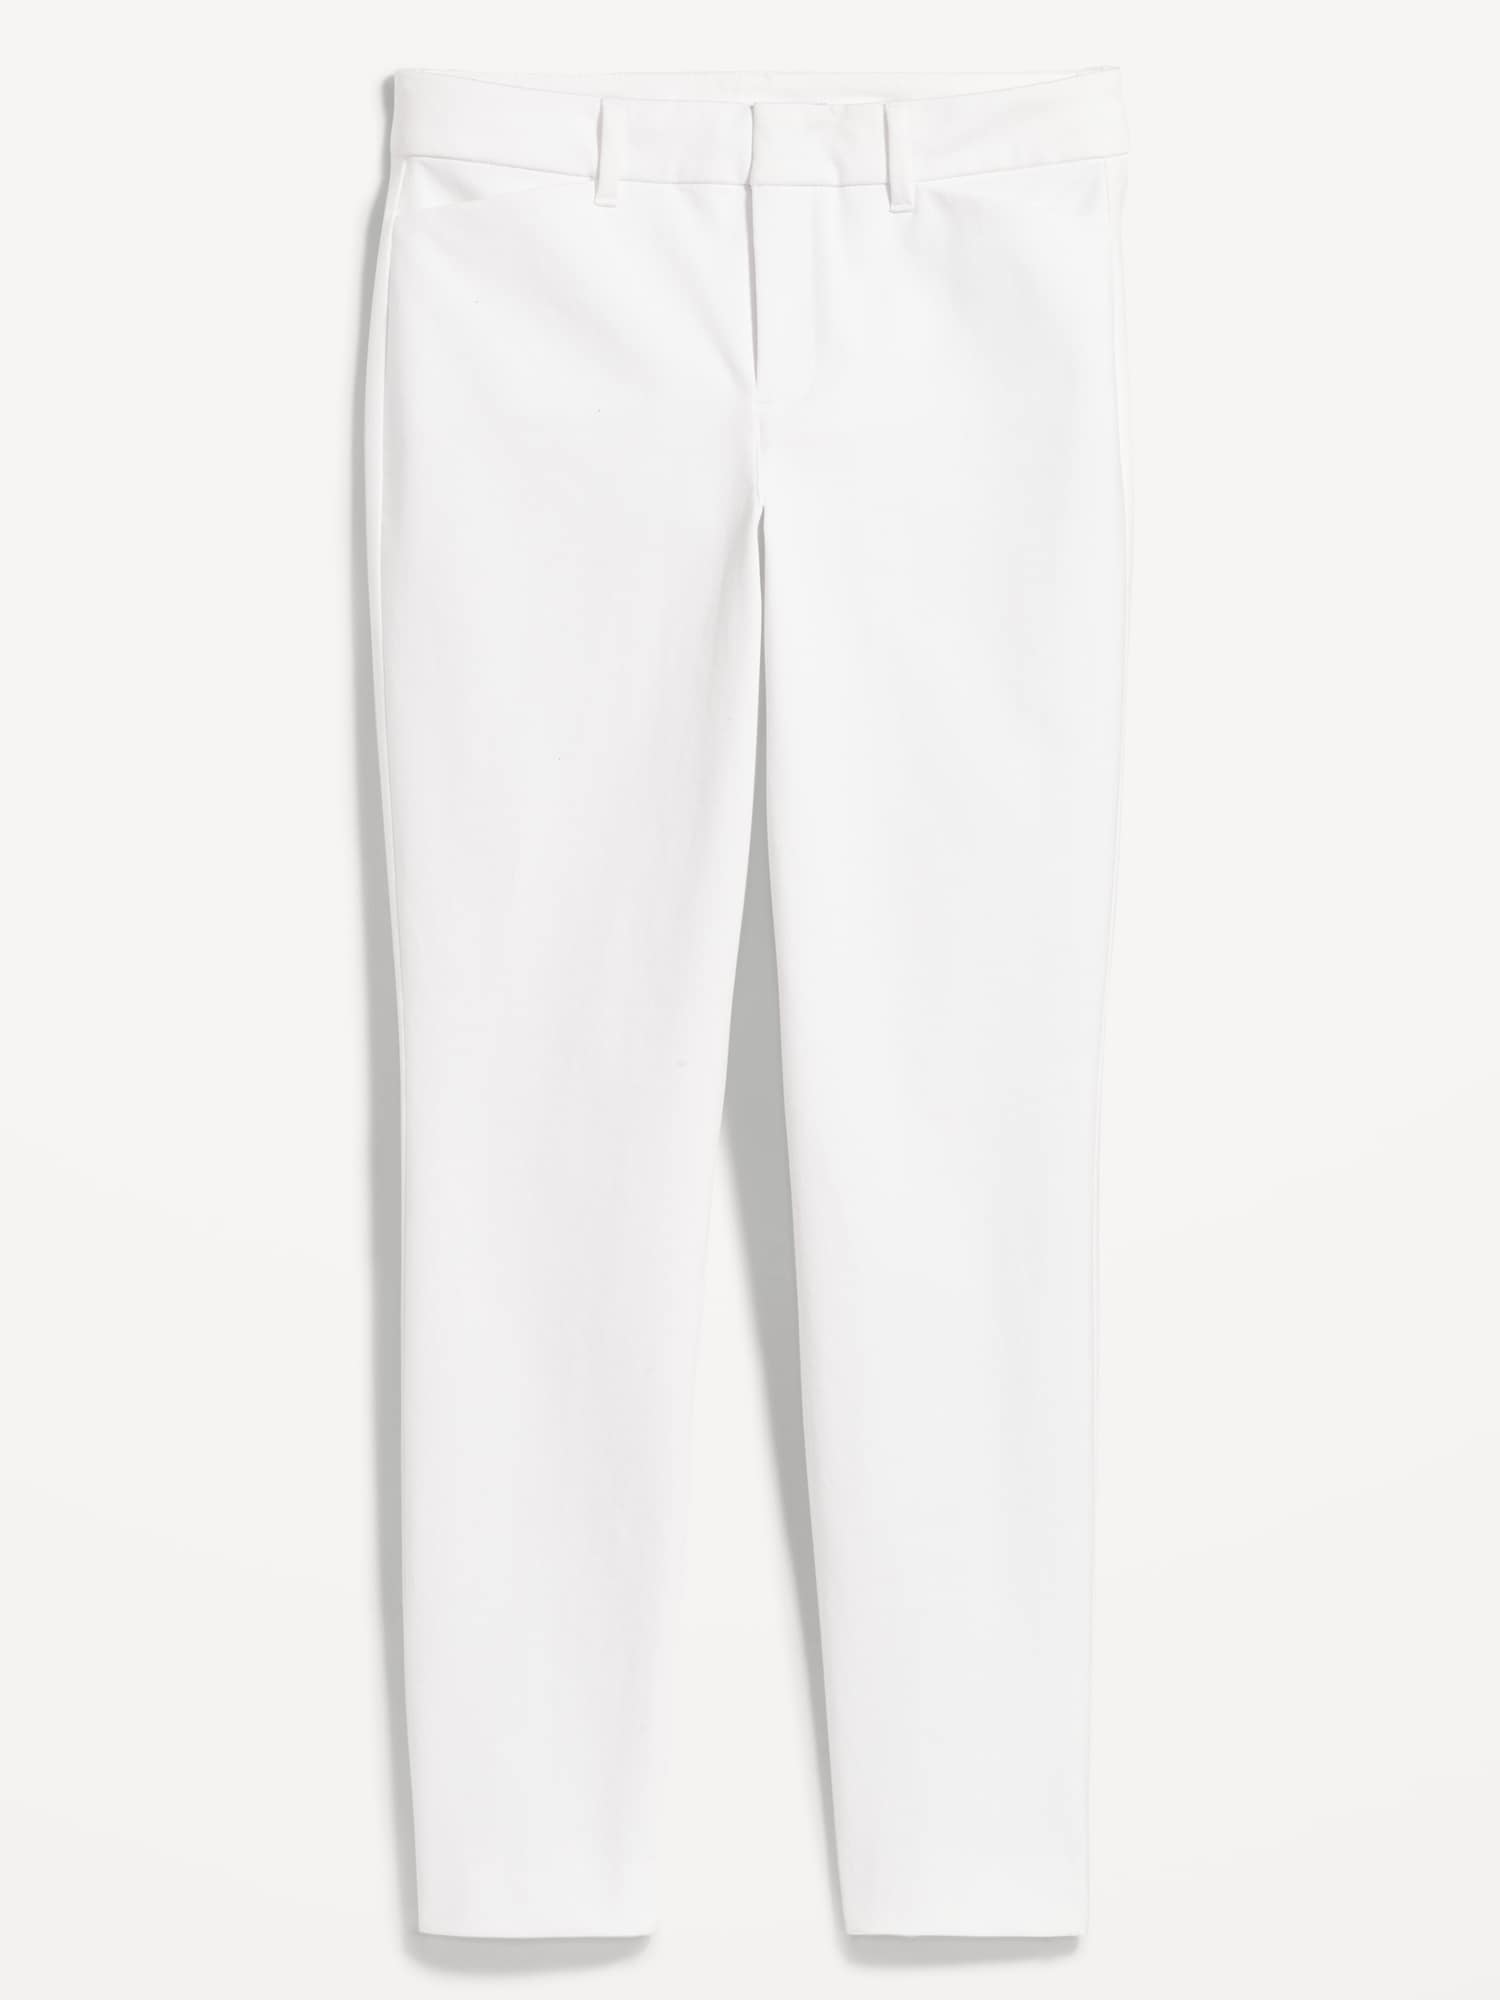 High-Waisted Pixie Skinny Ankle Pants